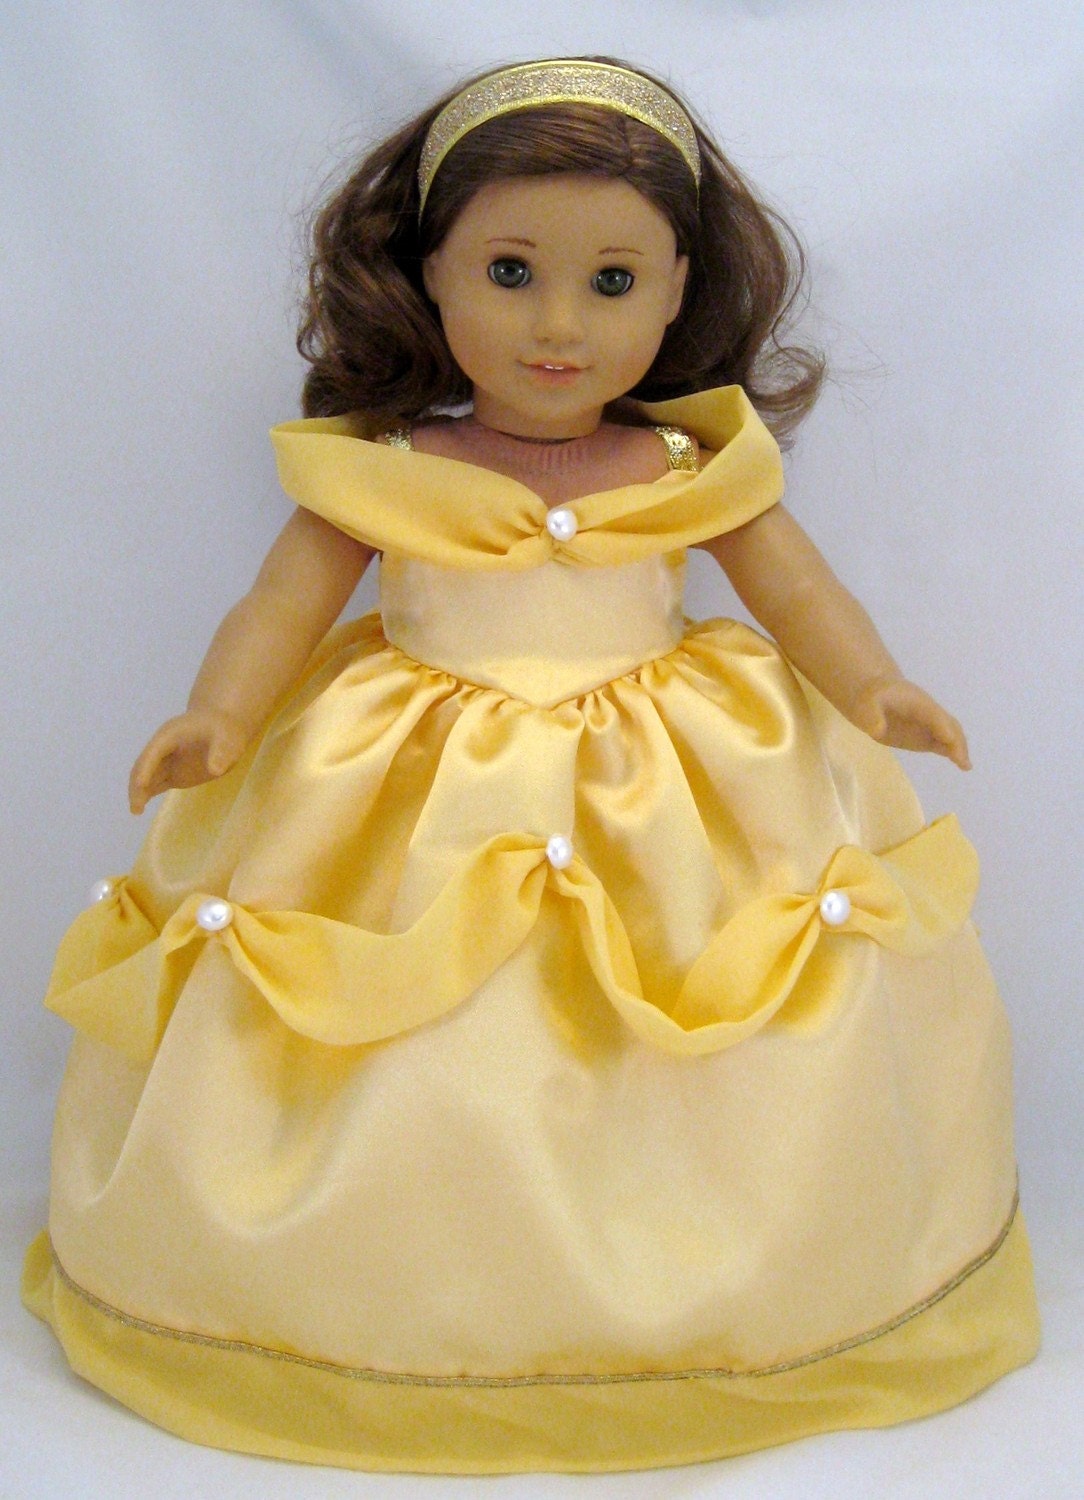 Belle Beauty and The Beast Princess Dress fits American Girl